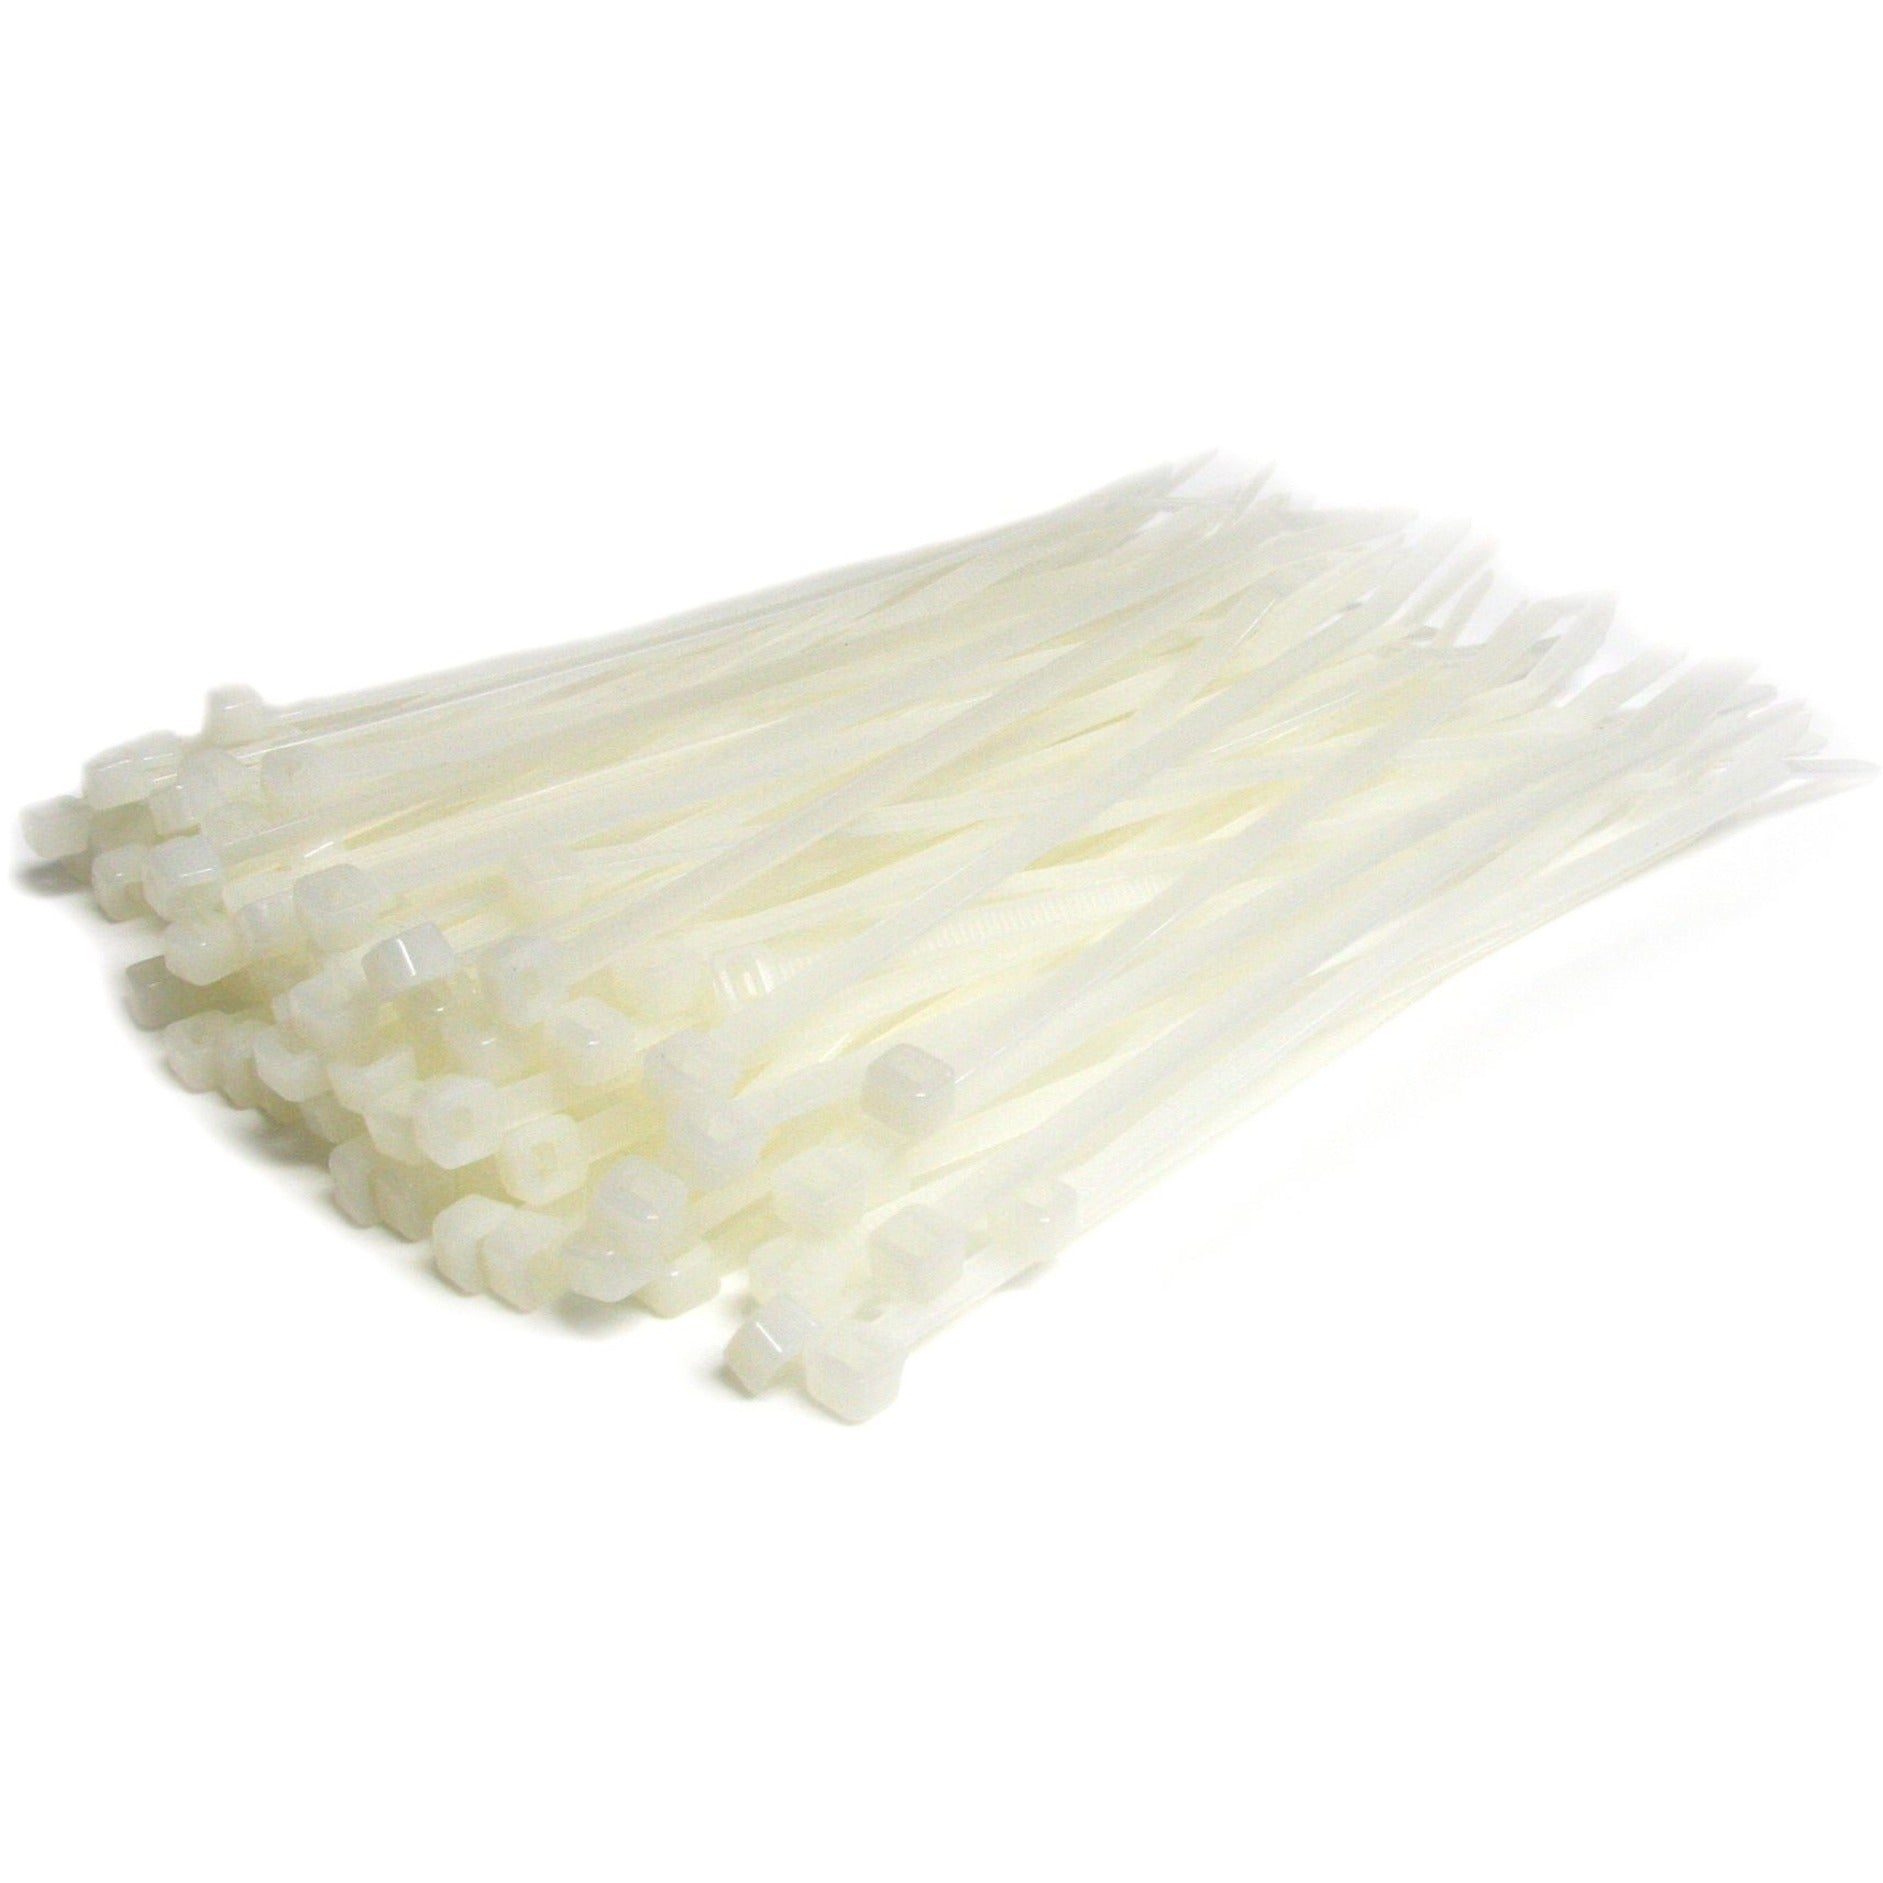 StarTech.com CV150K 6in Nylon Cable Ties - Bulk Pack of 1000, TAA Compliant, 2 Year Warranty, RoHS & REACH Certified